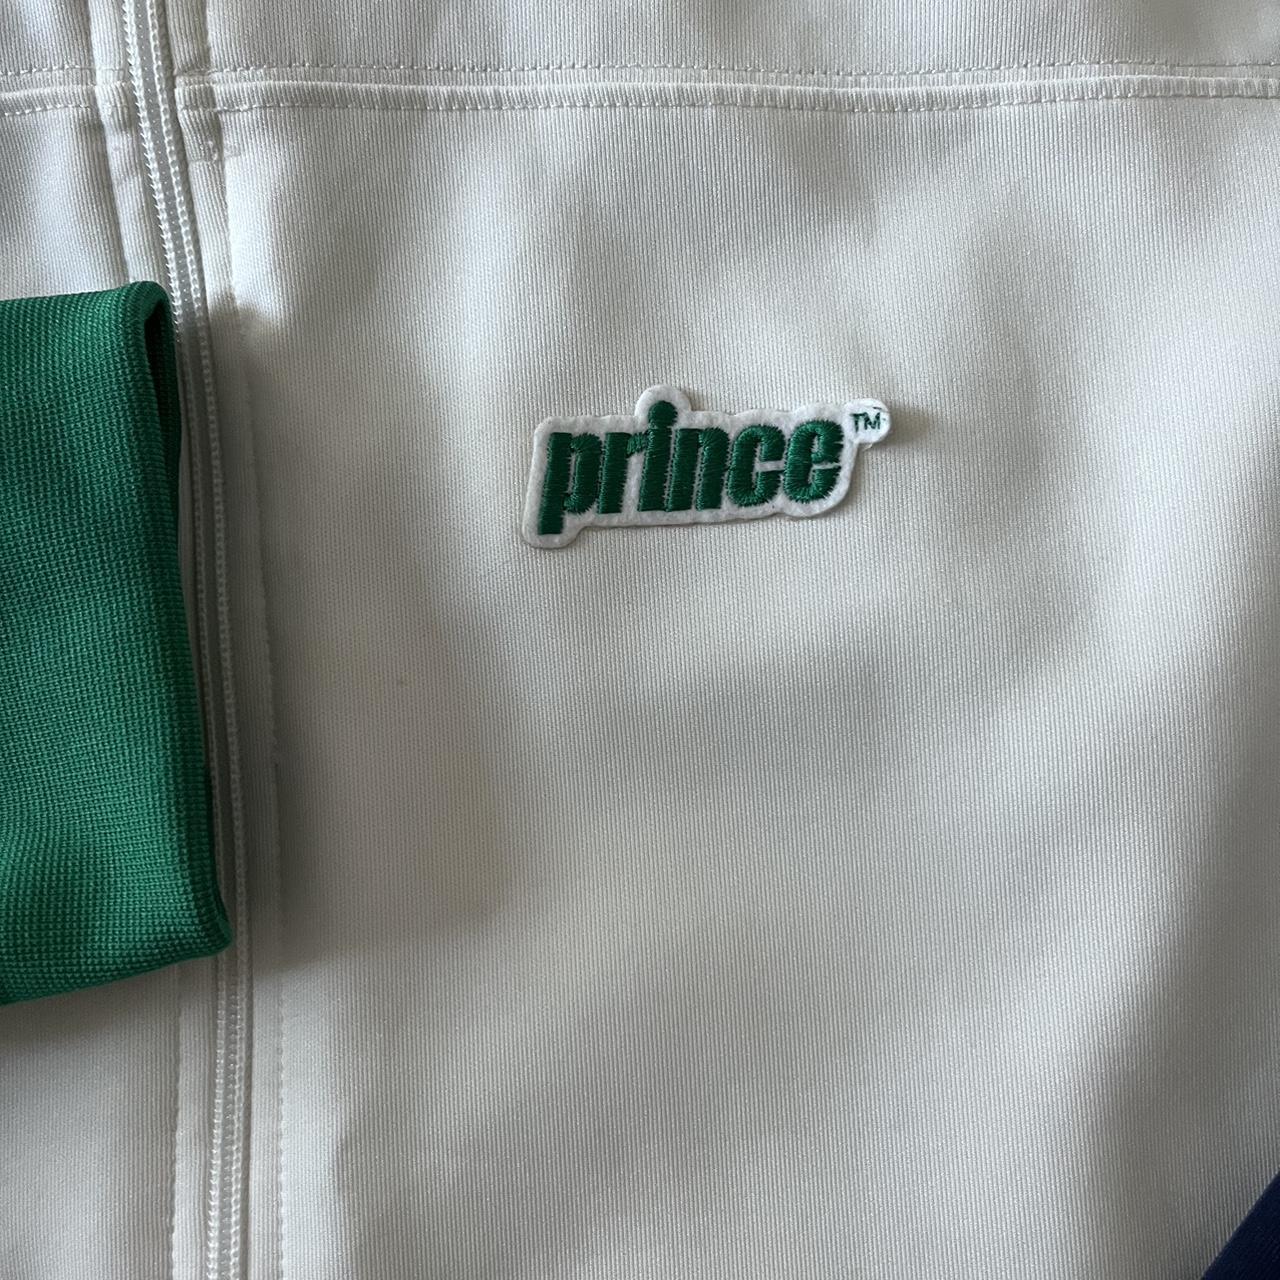 Prince Men's White and Green Jacket (2)